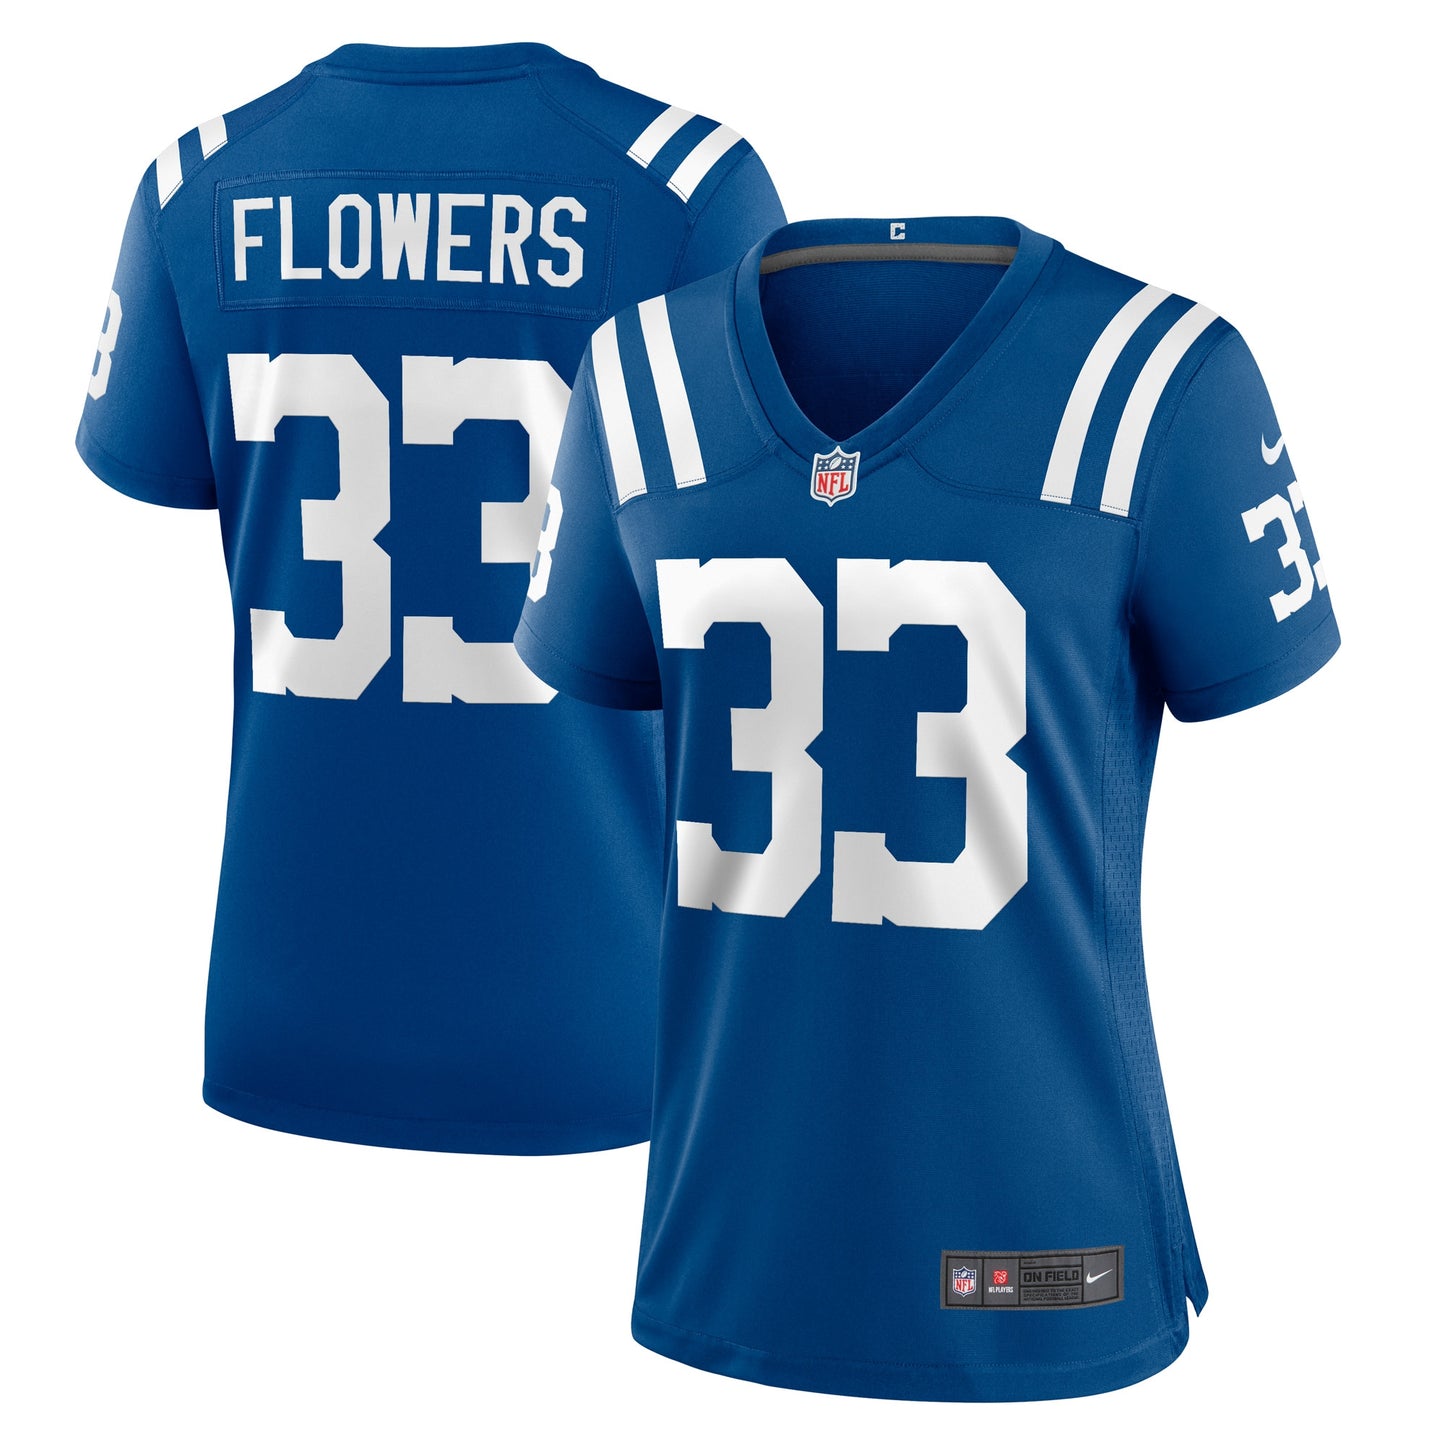 Dallis Flowers Indianapolis Colts Nike Women's Game Player Jersey - Royal